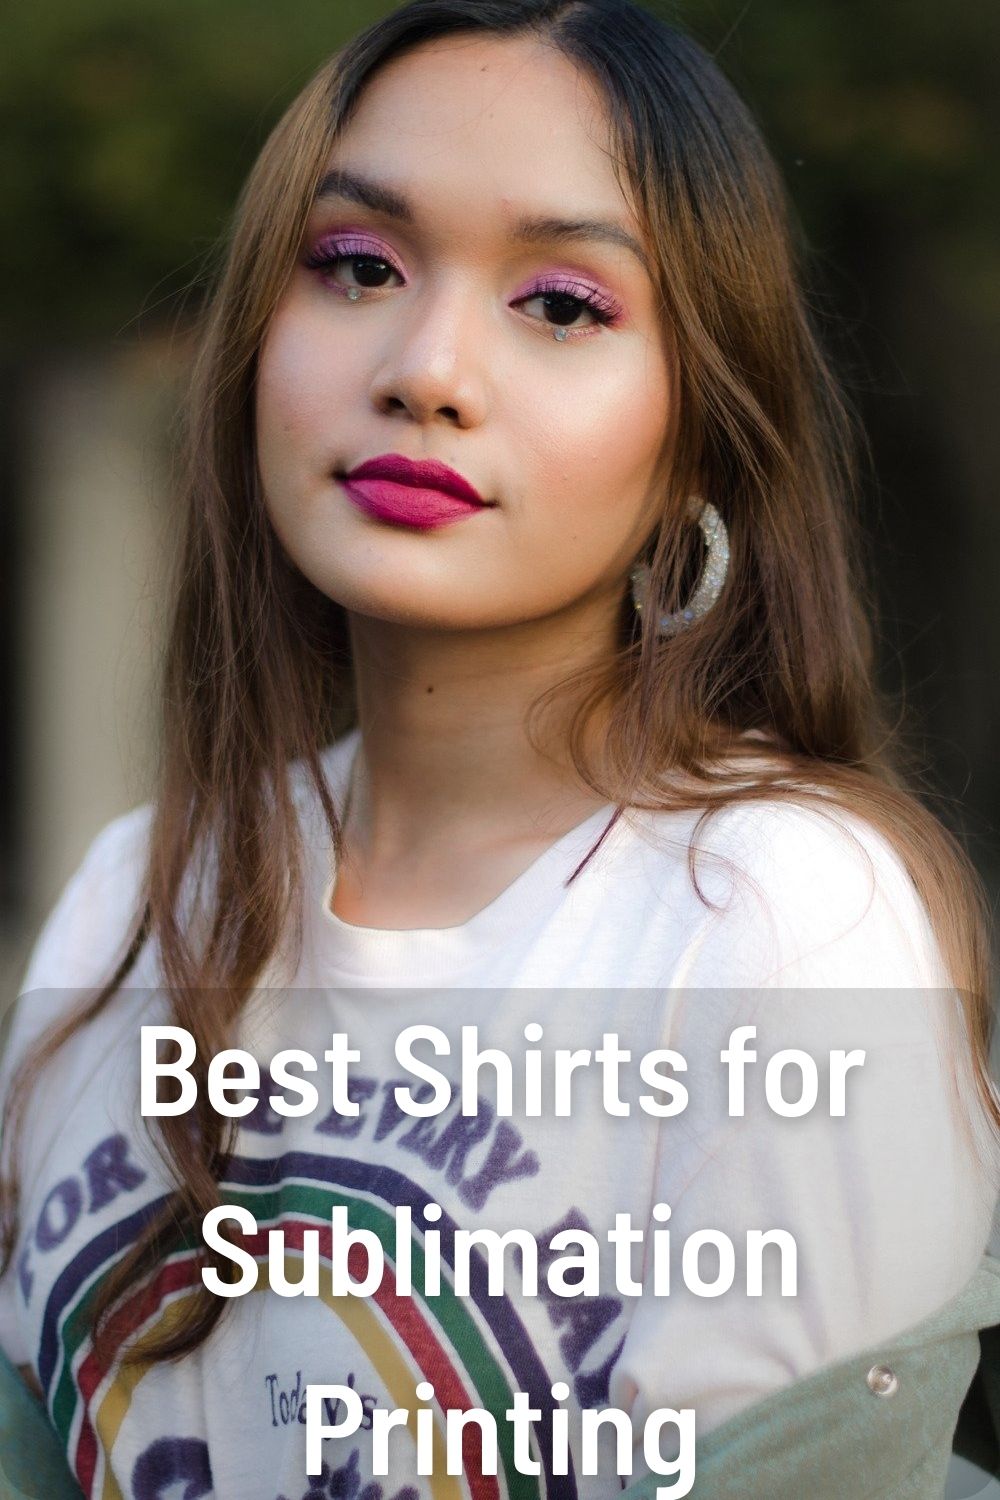 Best Shirts for Sublimation Printing